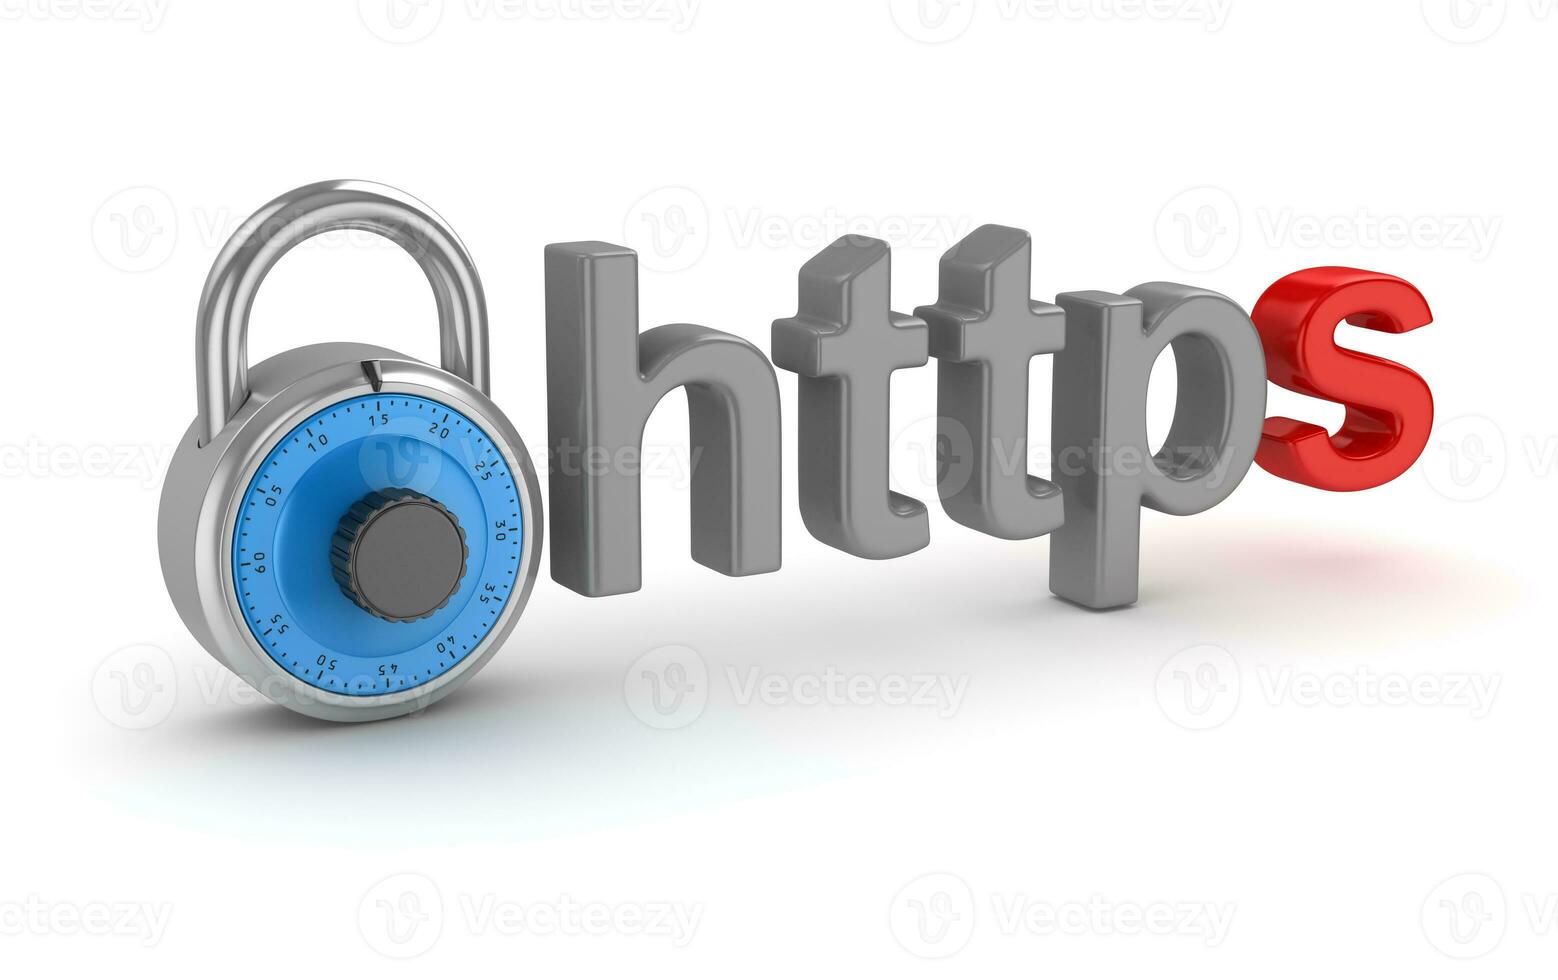 Https Internet Concept with Lock photo